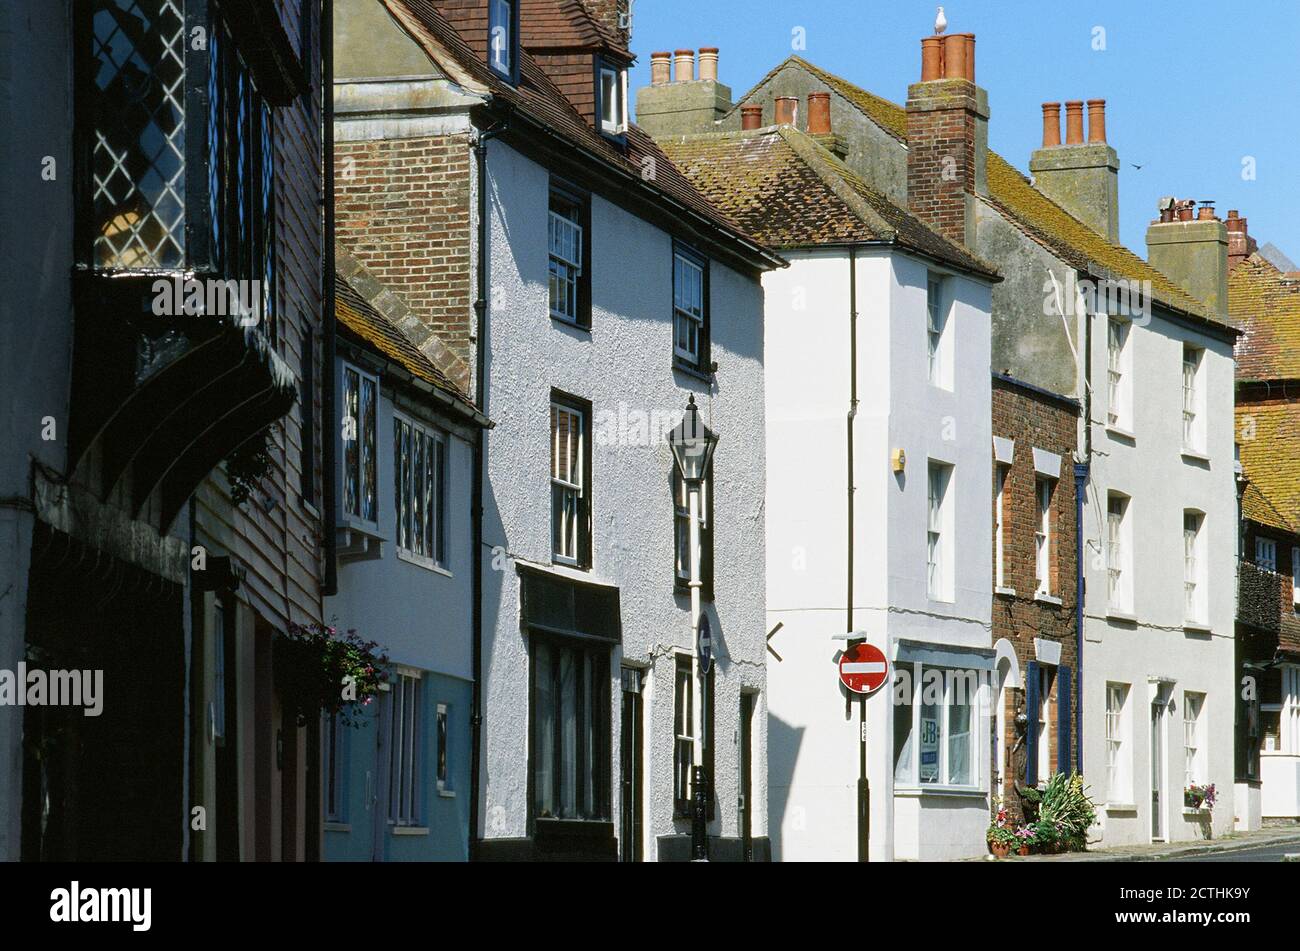 Fila di vecchie case in All Saints Street, Hastings Old Town, East Sussex, Inghilterra meridionale Foto Stock